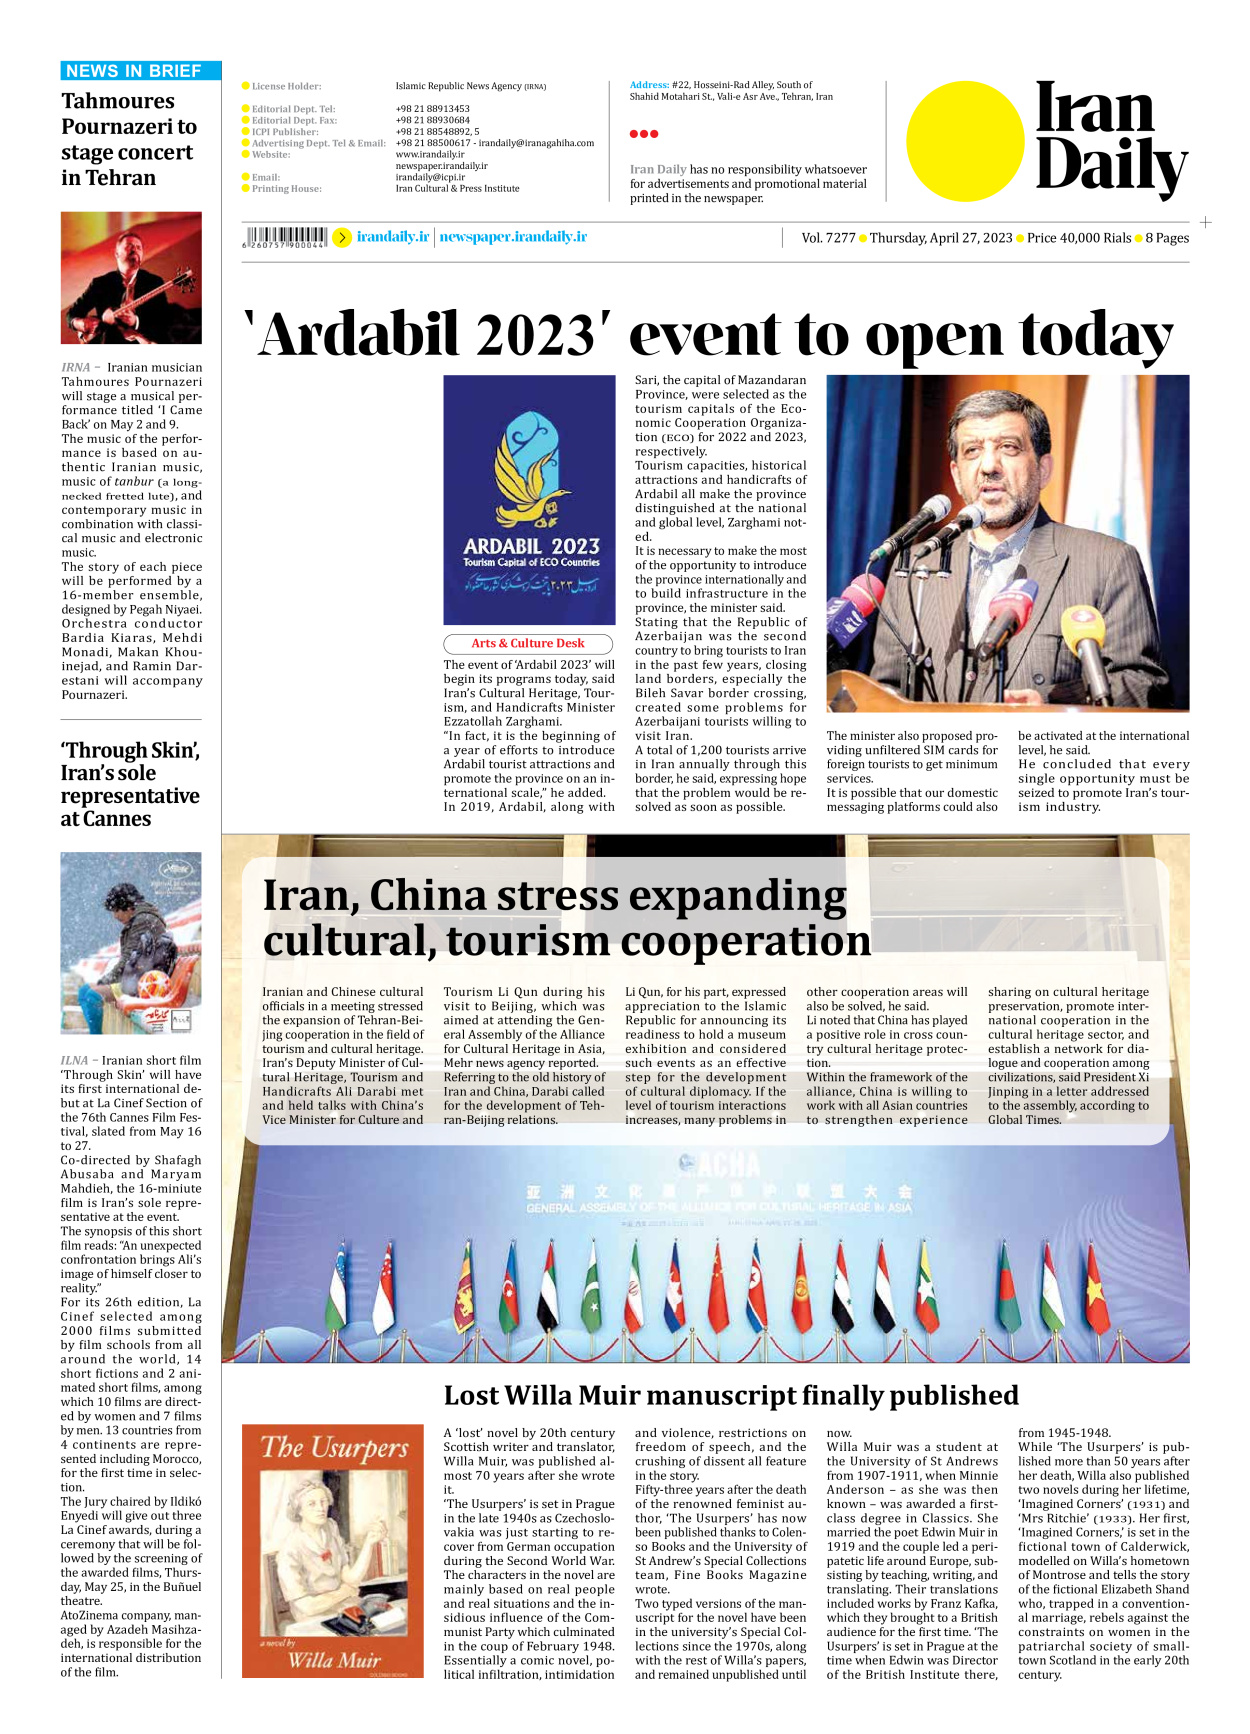 Iran Daily - Number Seven Thousand Two Hundred and Seventy Seven - 27 April 2023 - Page 8